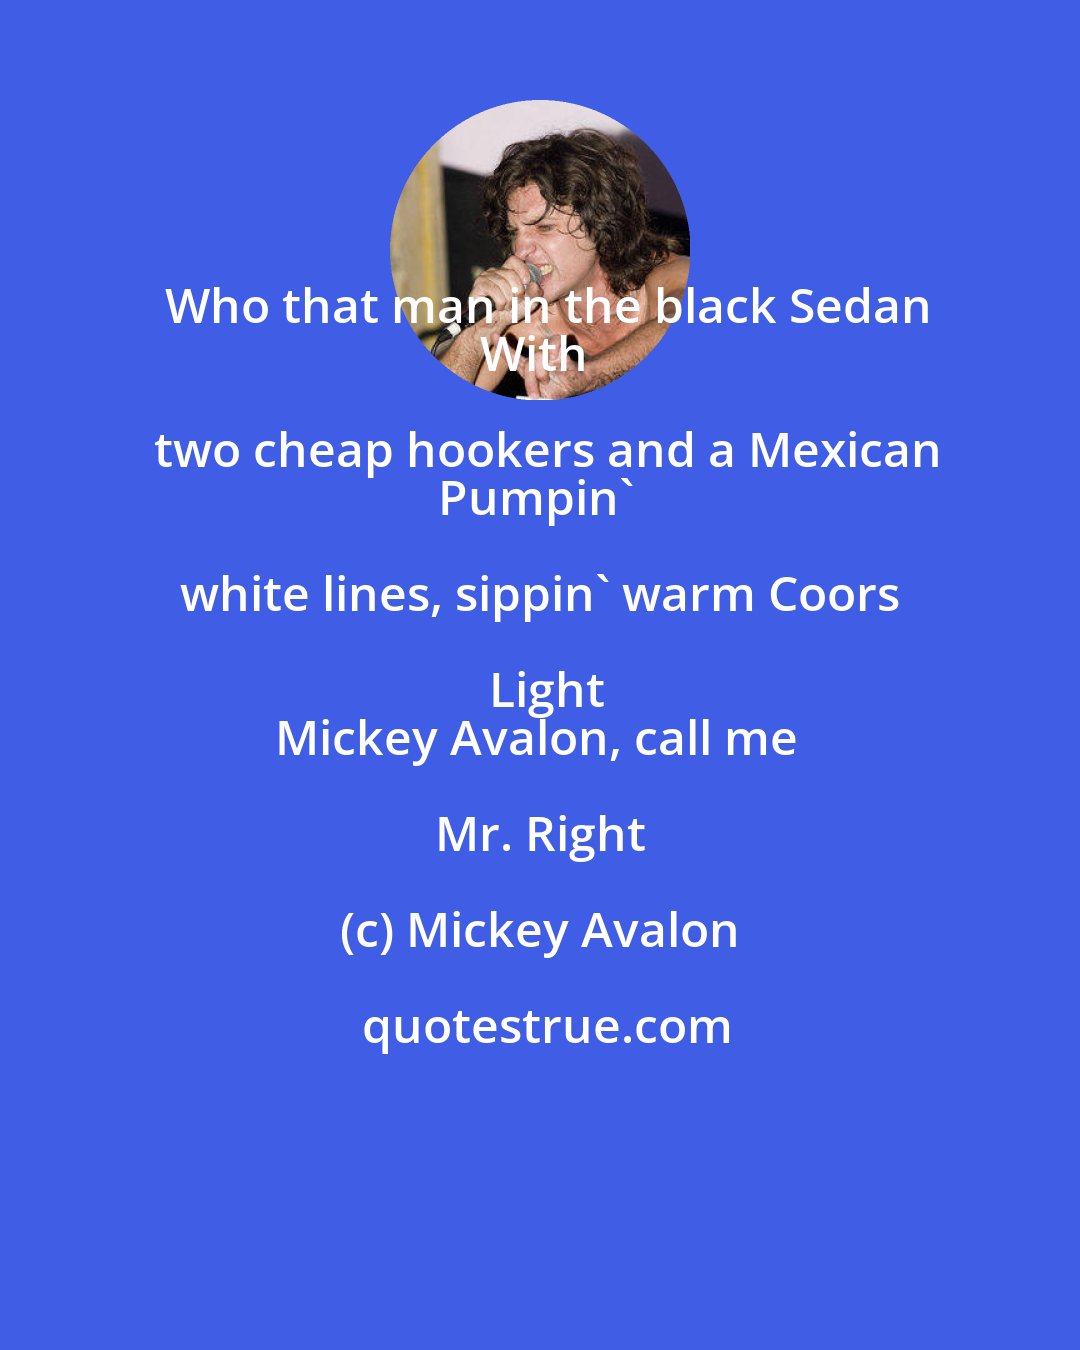 Mickey Avalon: Who that man in the black Sedan
With two cheap hookers and a Mexican
Pumpin' white lines, sippin' warm Coors Light
Mickey Avalon, call me Mr. Right